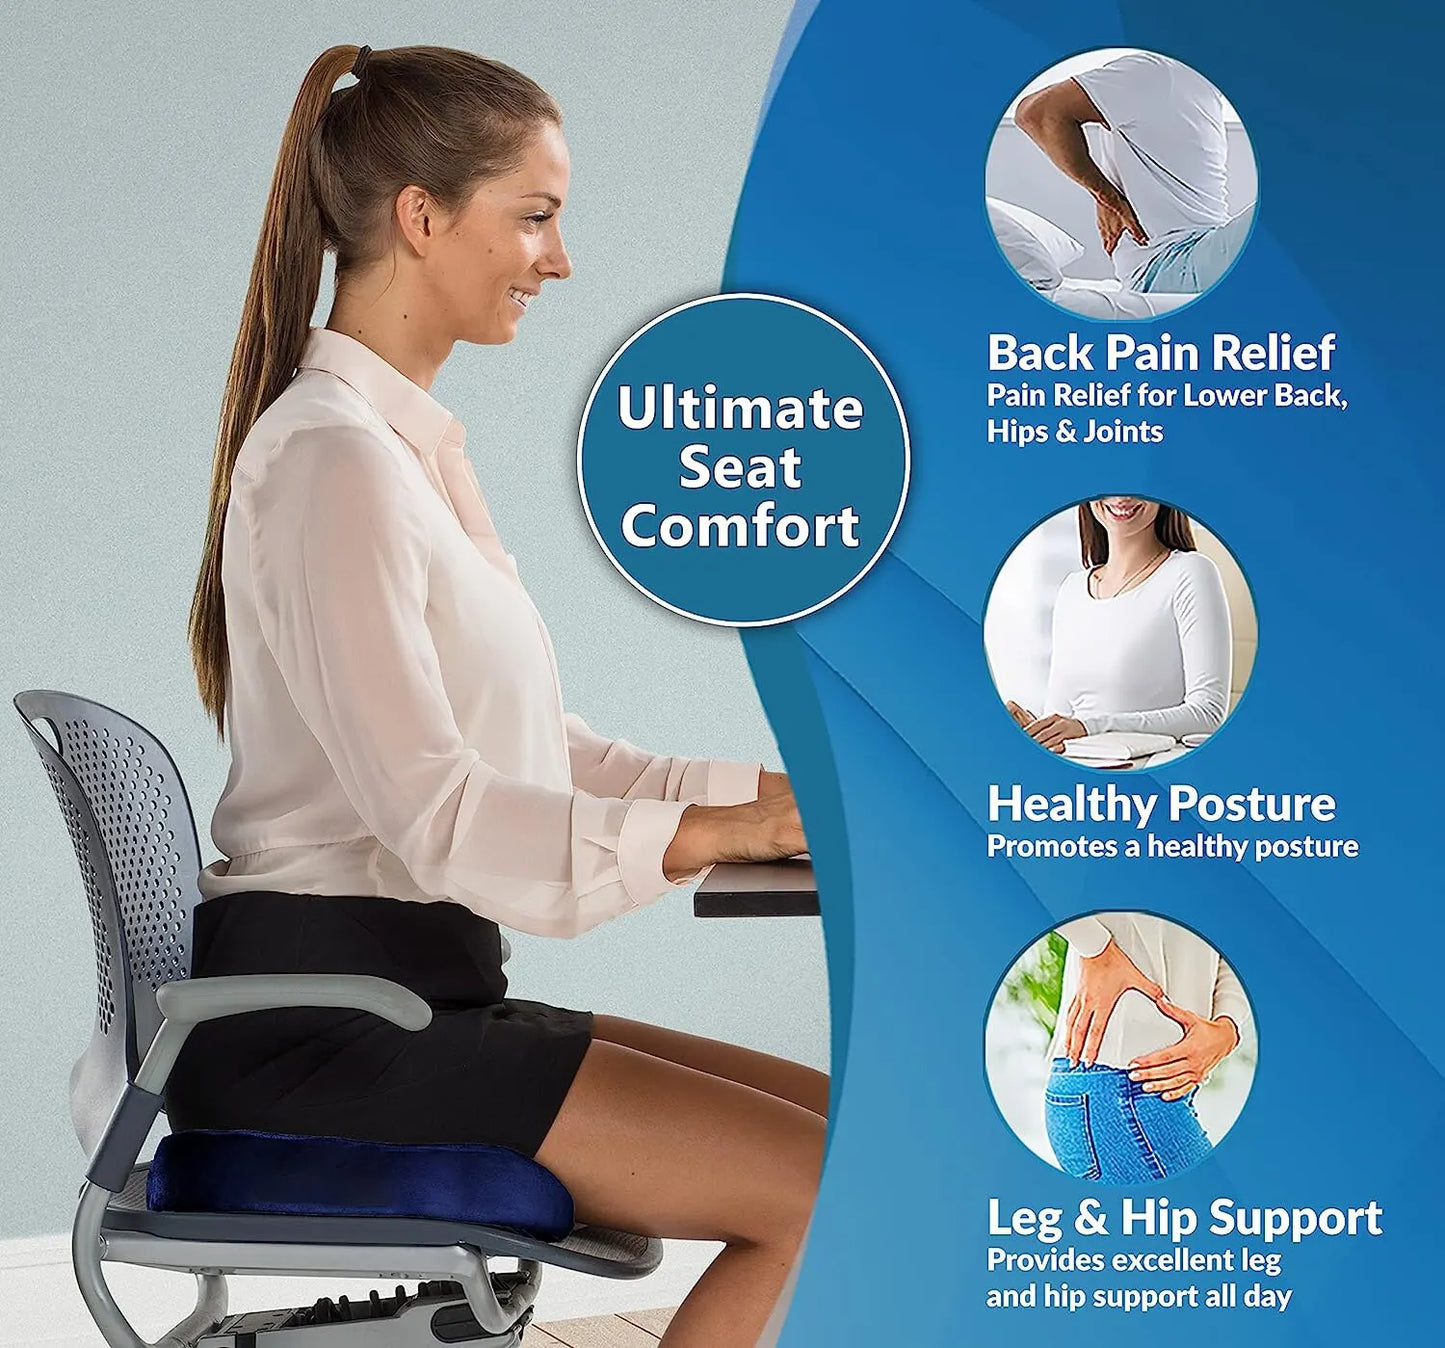 ComfortSeat Gel and Memory Foam Seat Cushion for Home Office and Car - Back Pain Relief, Improve Posture, Sitting Comfort